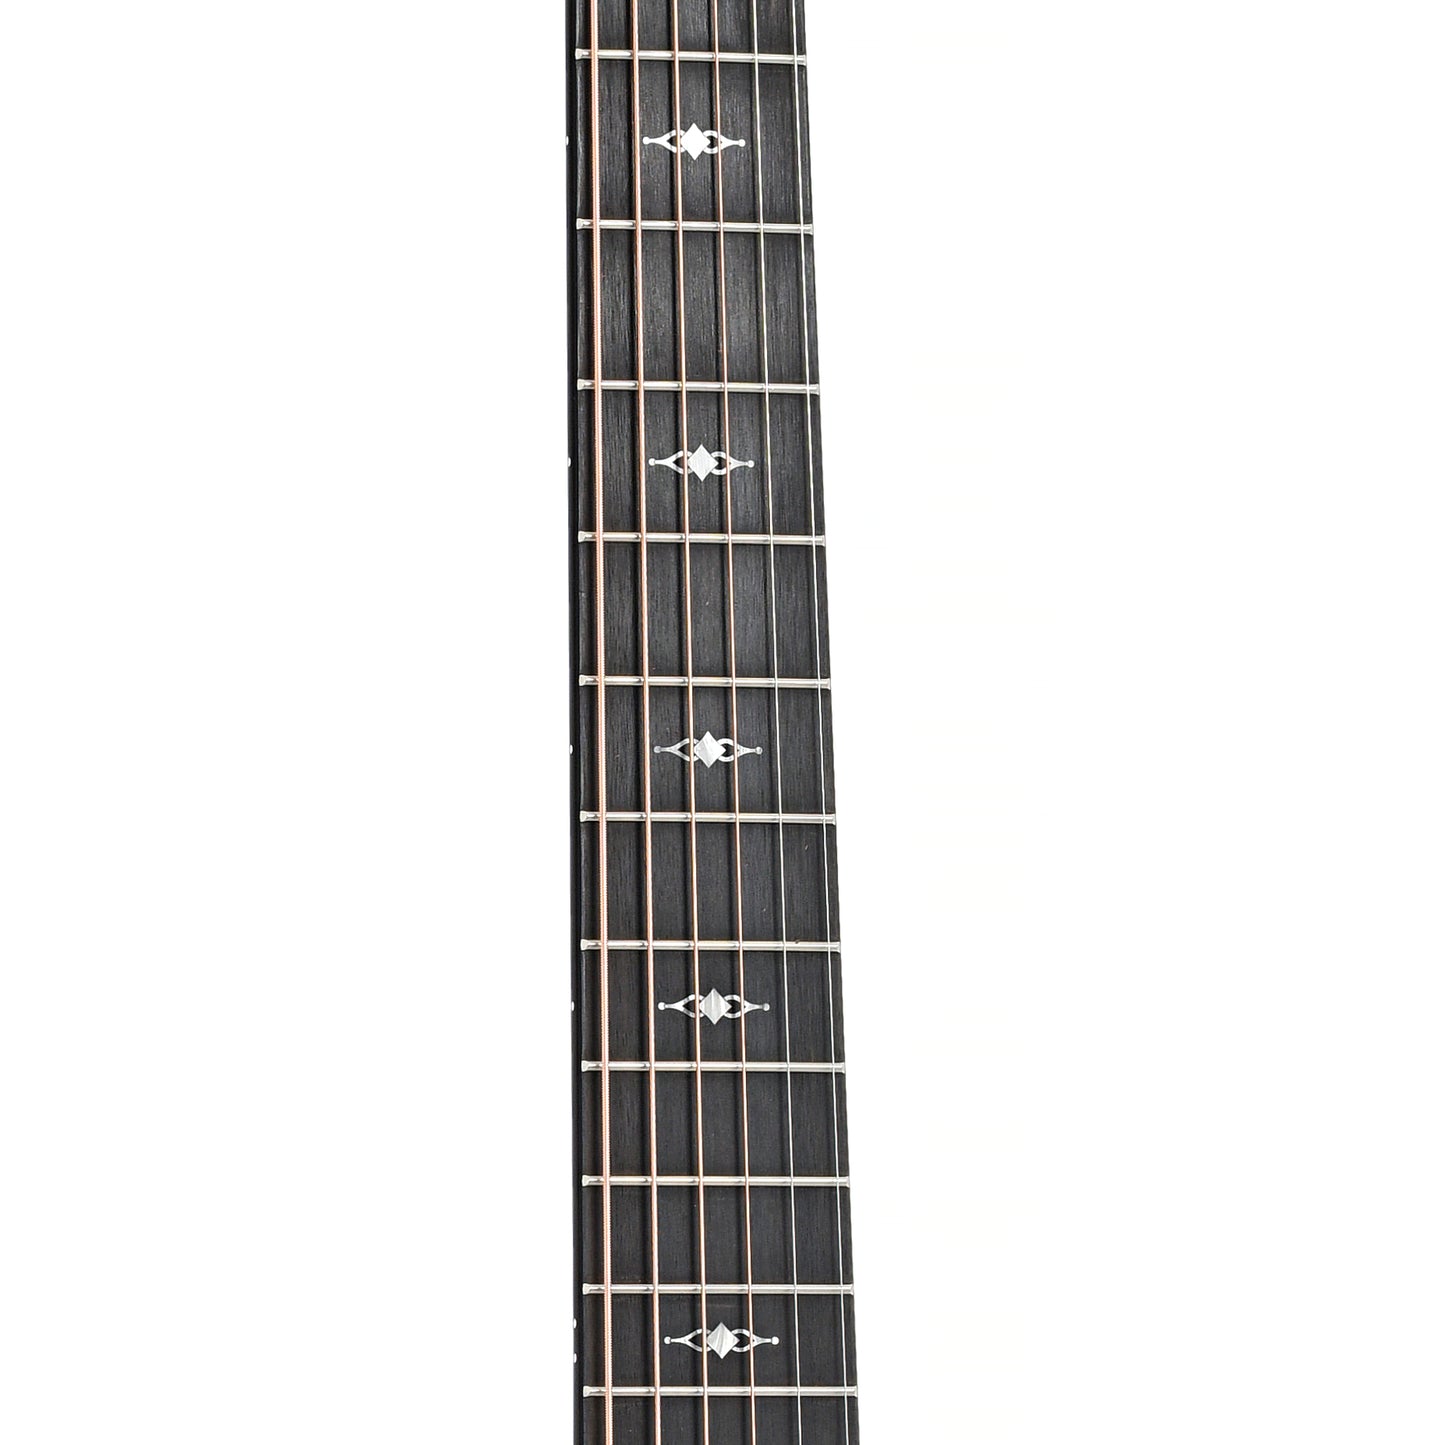 Fretboard of Taylor 326ce Acoustic-Electric Guitar